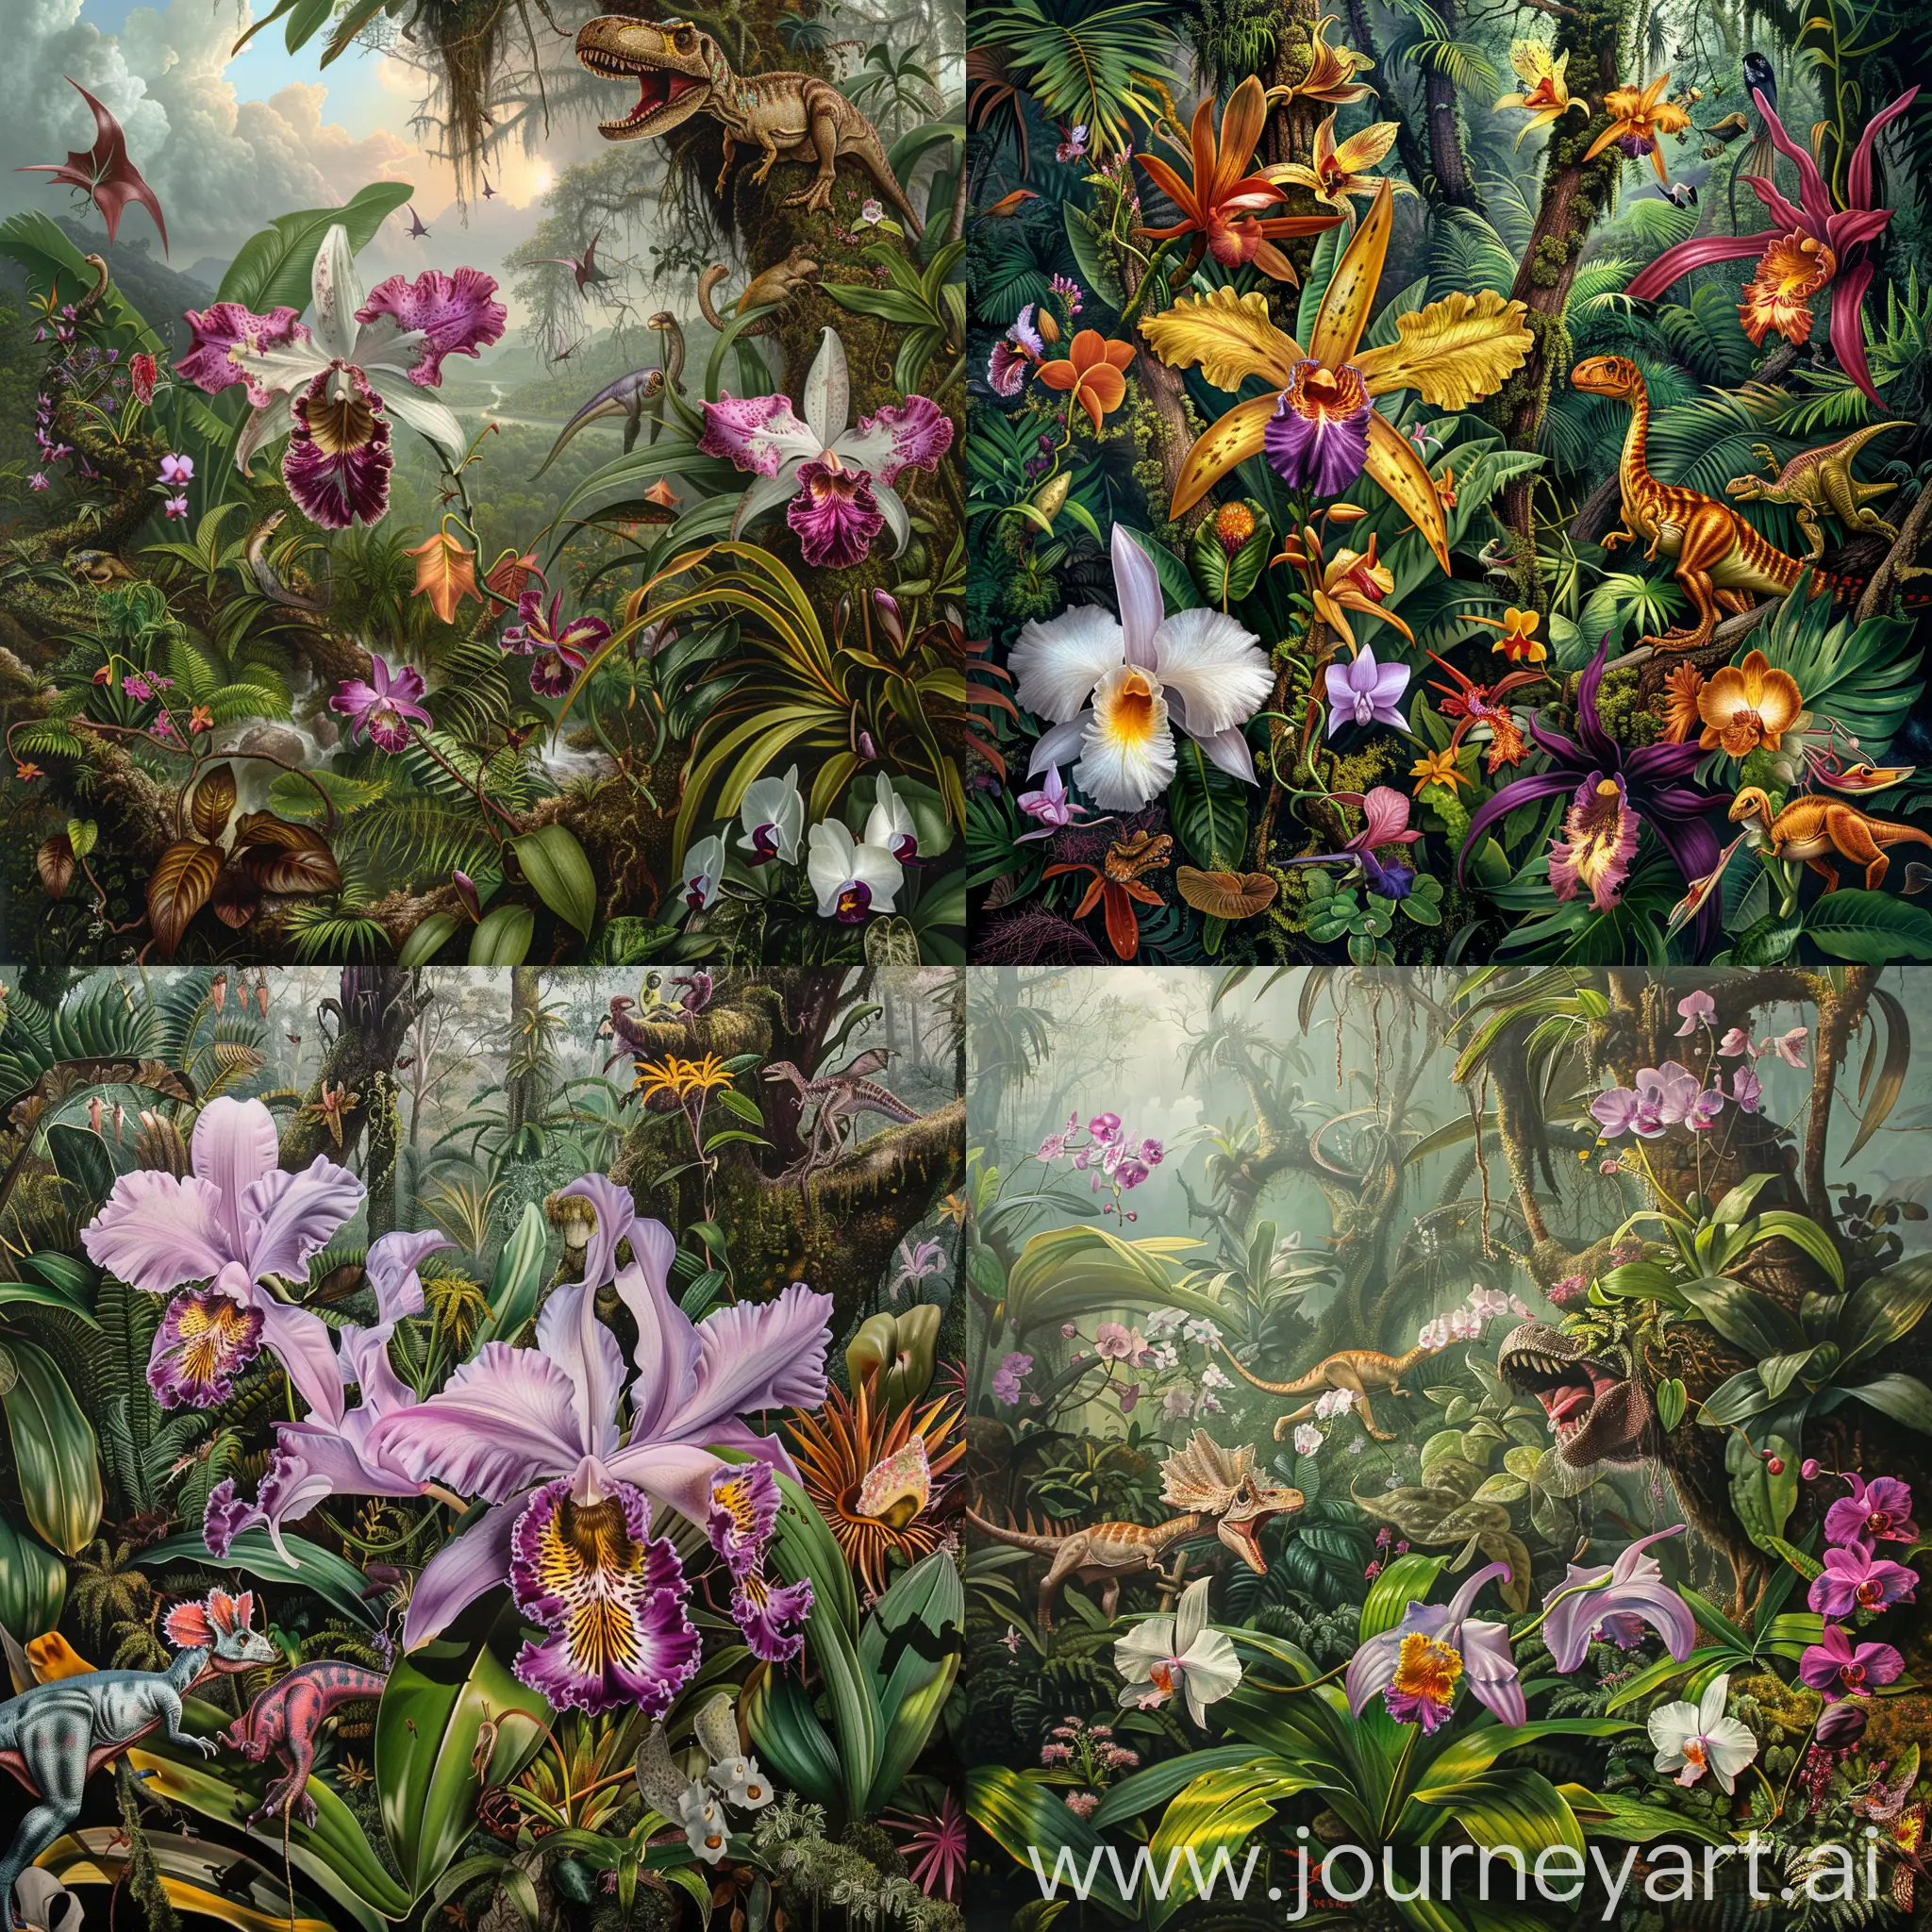 Depict the vibrant ecosystem of Brazil, from the dense jungles to the unique wildlife.
Experiment with scenes that might include an unexpected twist, like dinosaurs amidst modern flora and fauna.
Capture the intricate beauty of flora, such as orchids, in their natural or fantastical setting.
